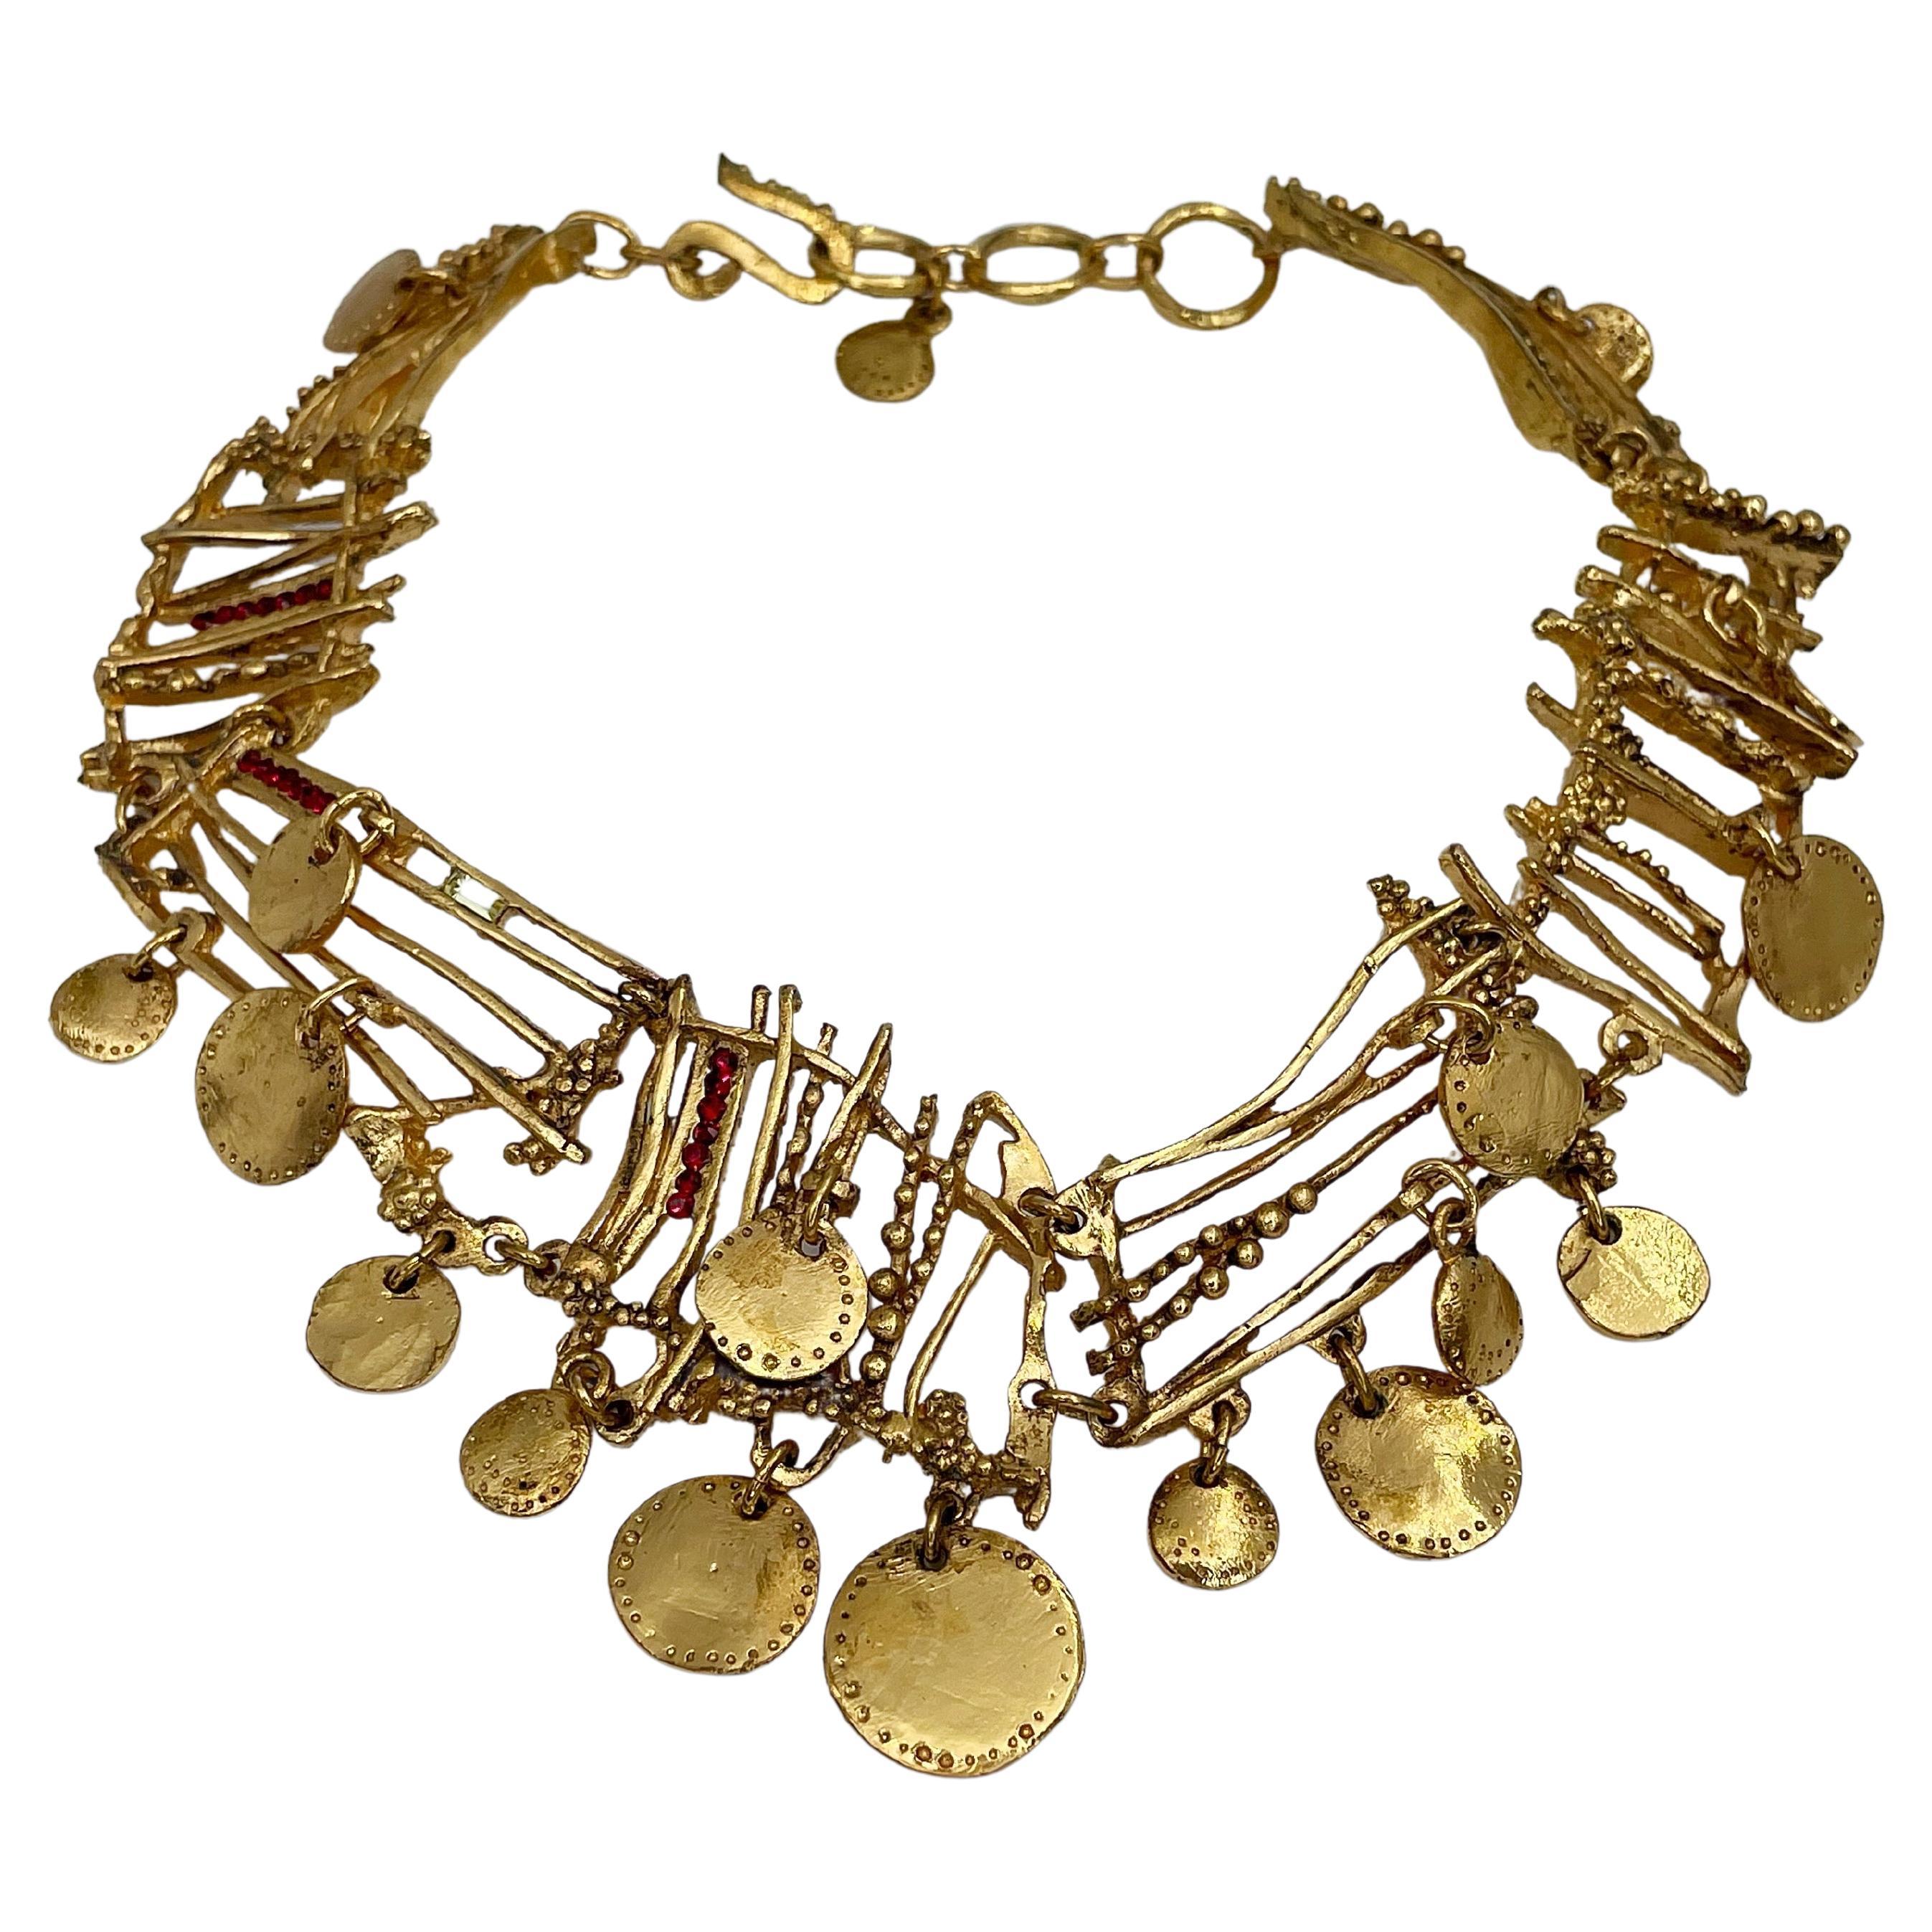 1990s Vintage Christian Lacroix Gold Tone Openwork Crystal Coin Choker Necklace